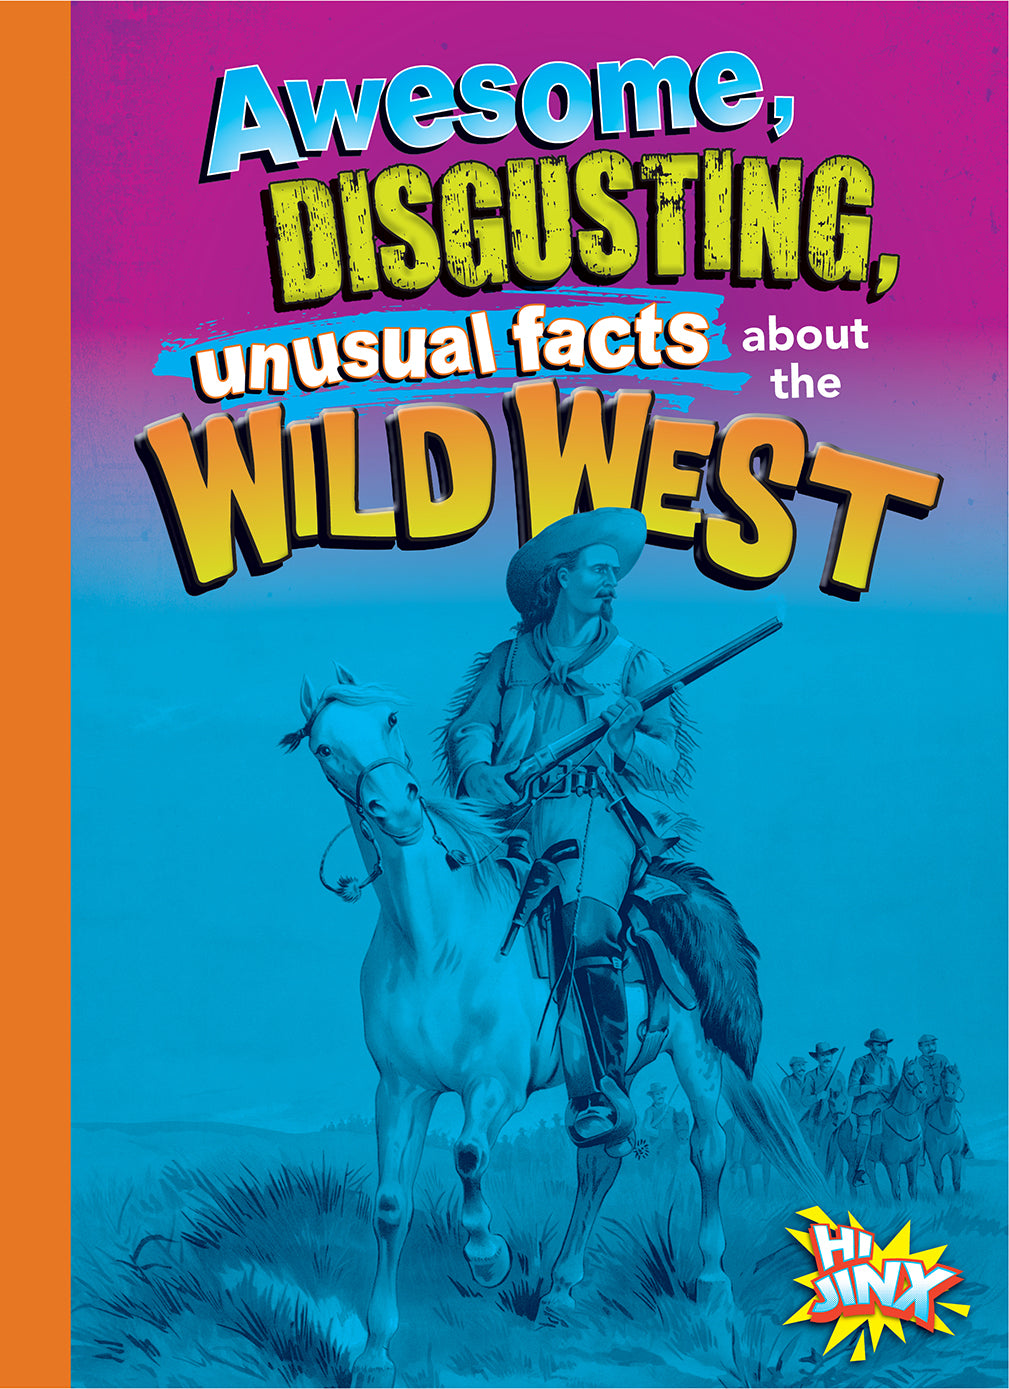 Gross, Awesome History: Awesome, Disgusting, Unusual Facts about the Wild West